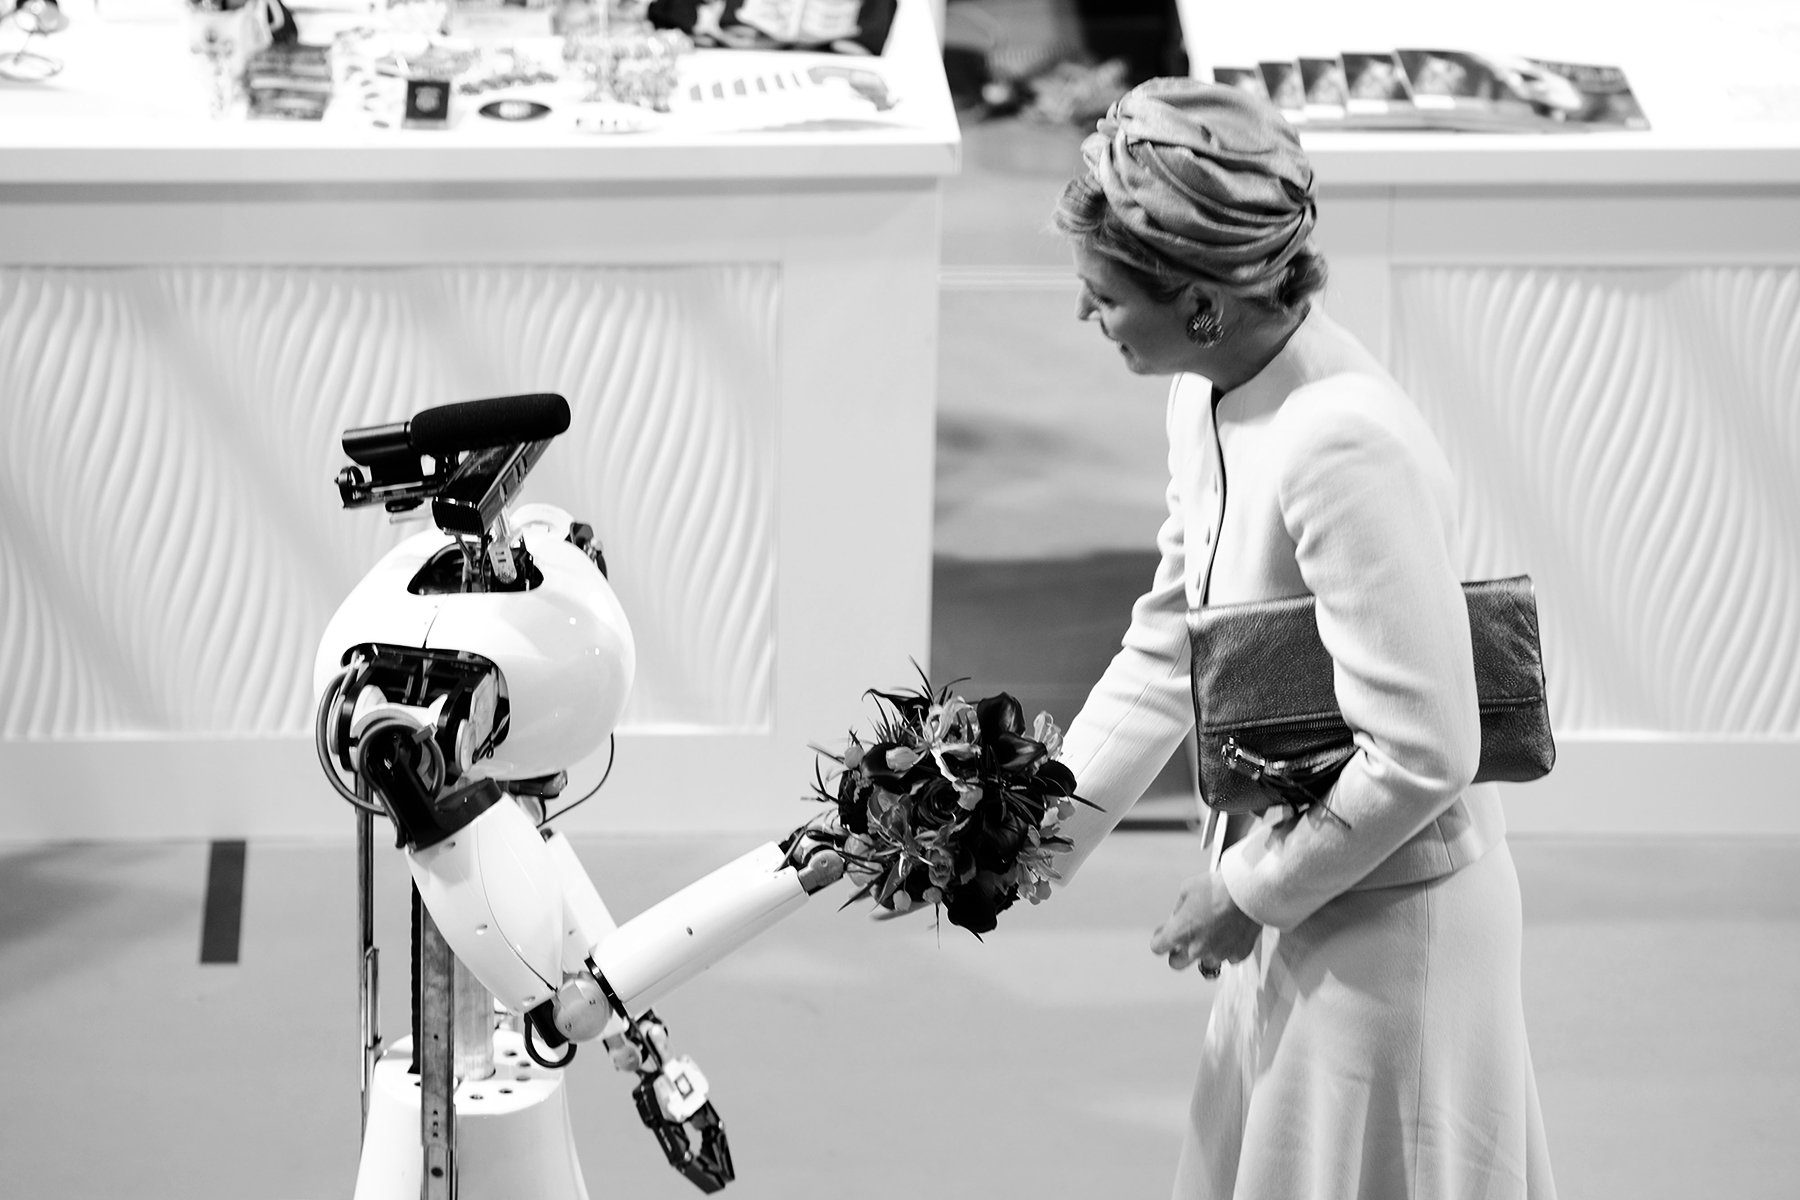 Maxima get flowers from a robot